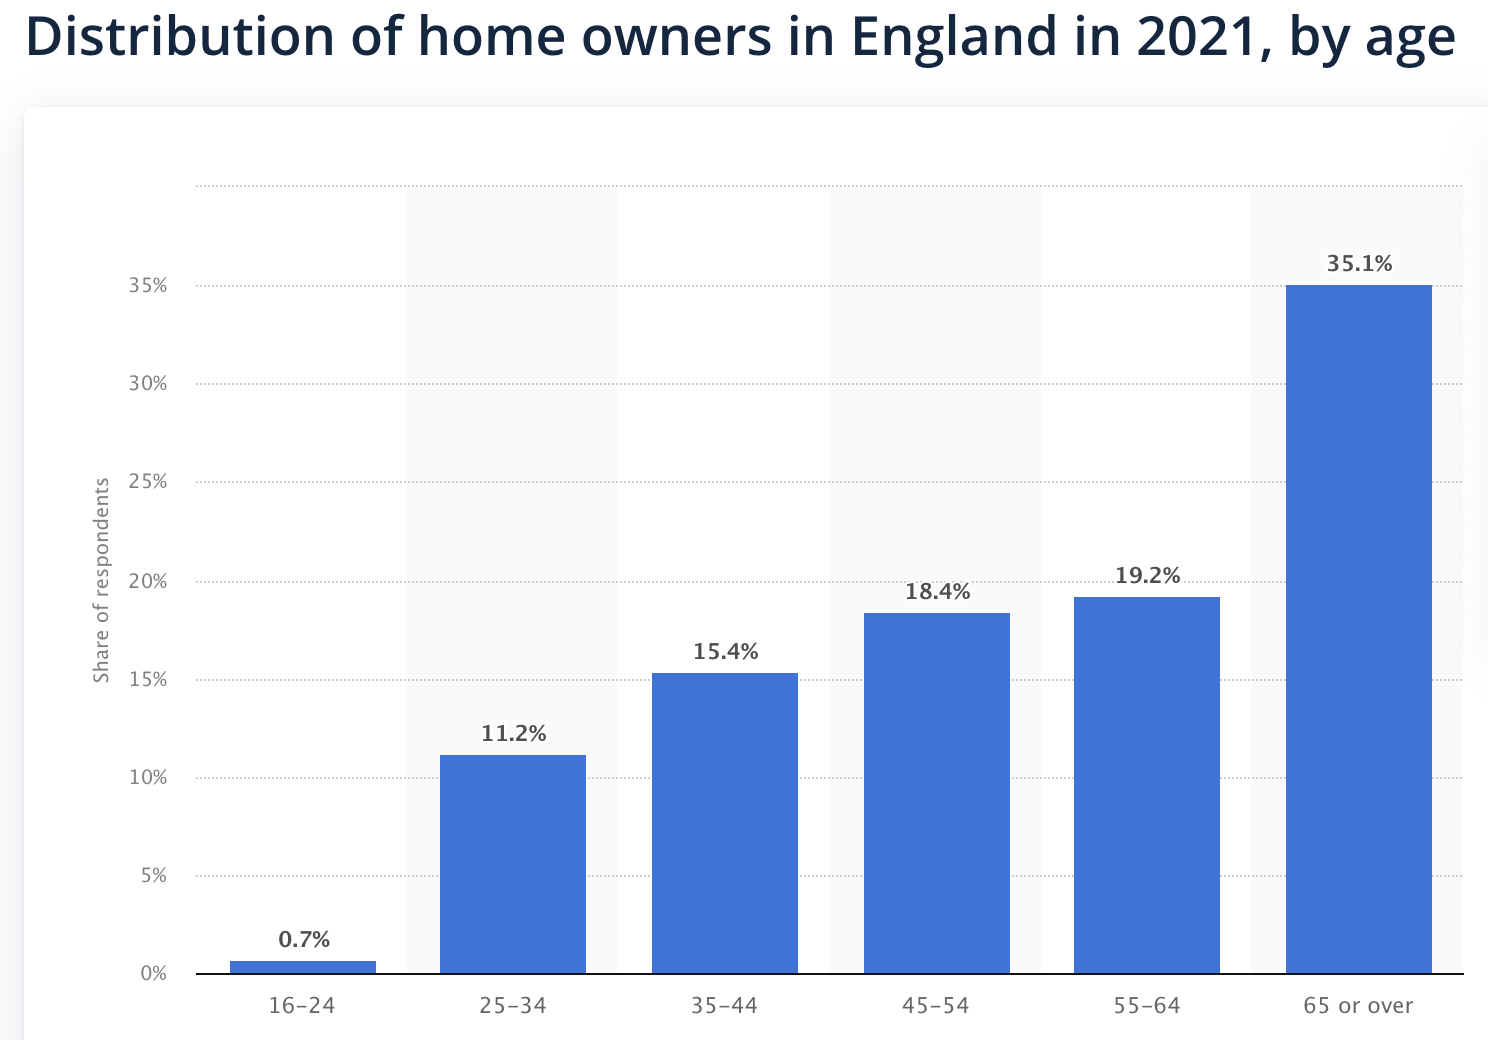 Source: https://www.statista.com/statistics/321065/uk-england-home-owners-age-groups/